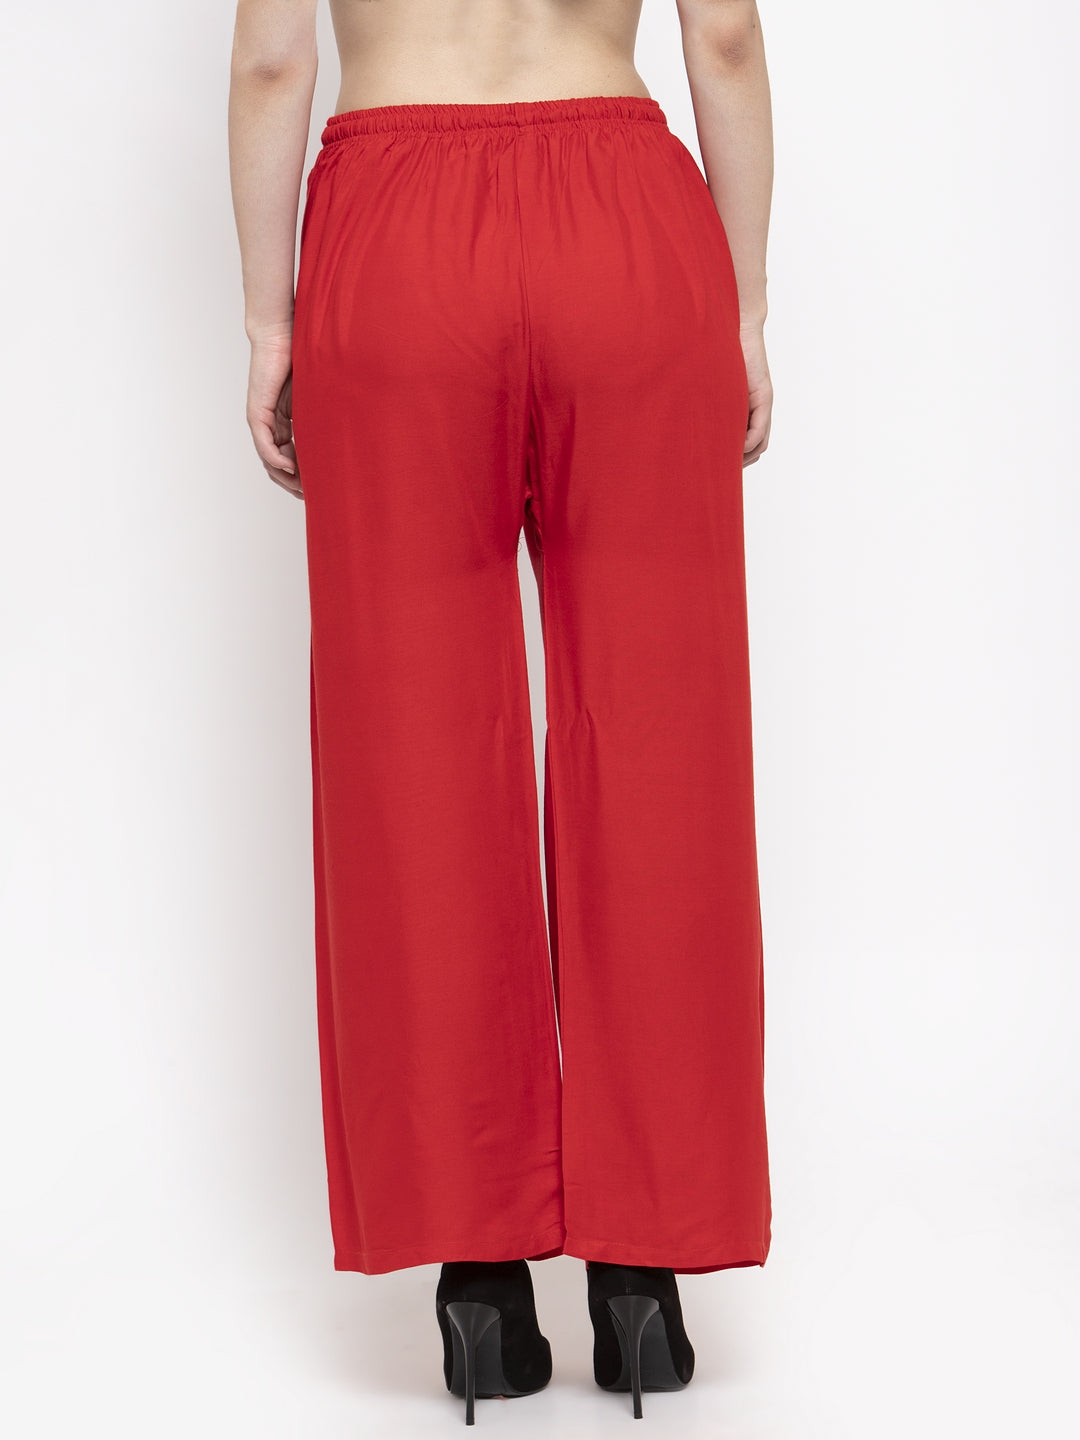 Women's Red Solid Rayon Palazzo - Wahe-NOOR